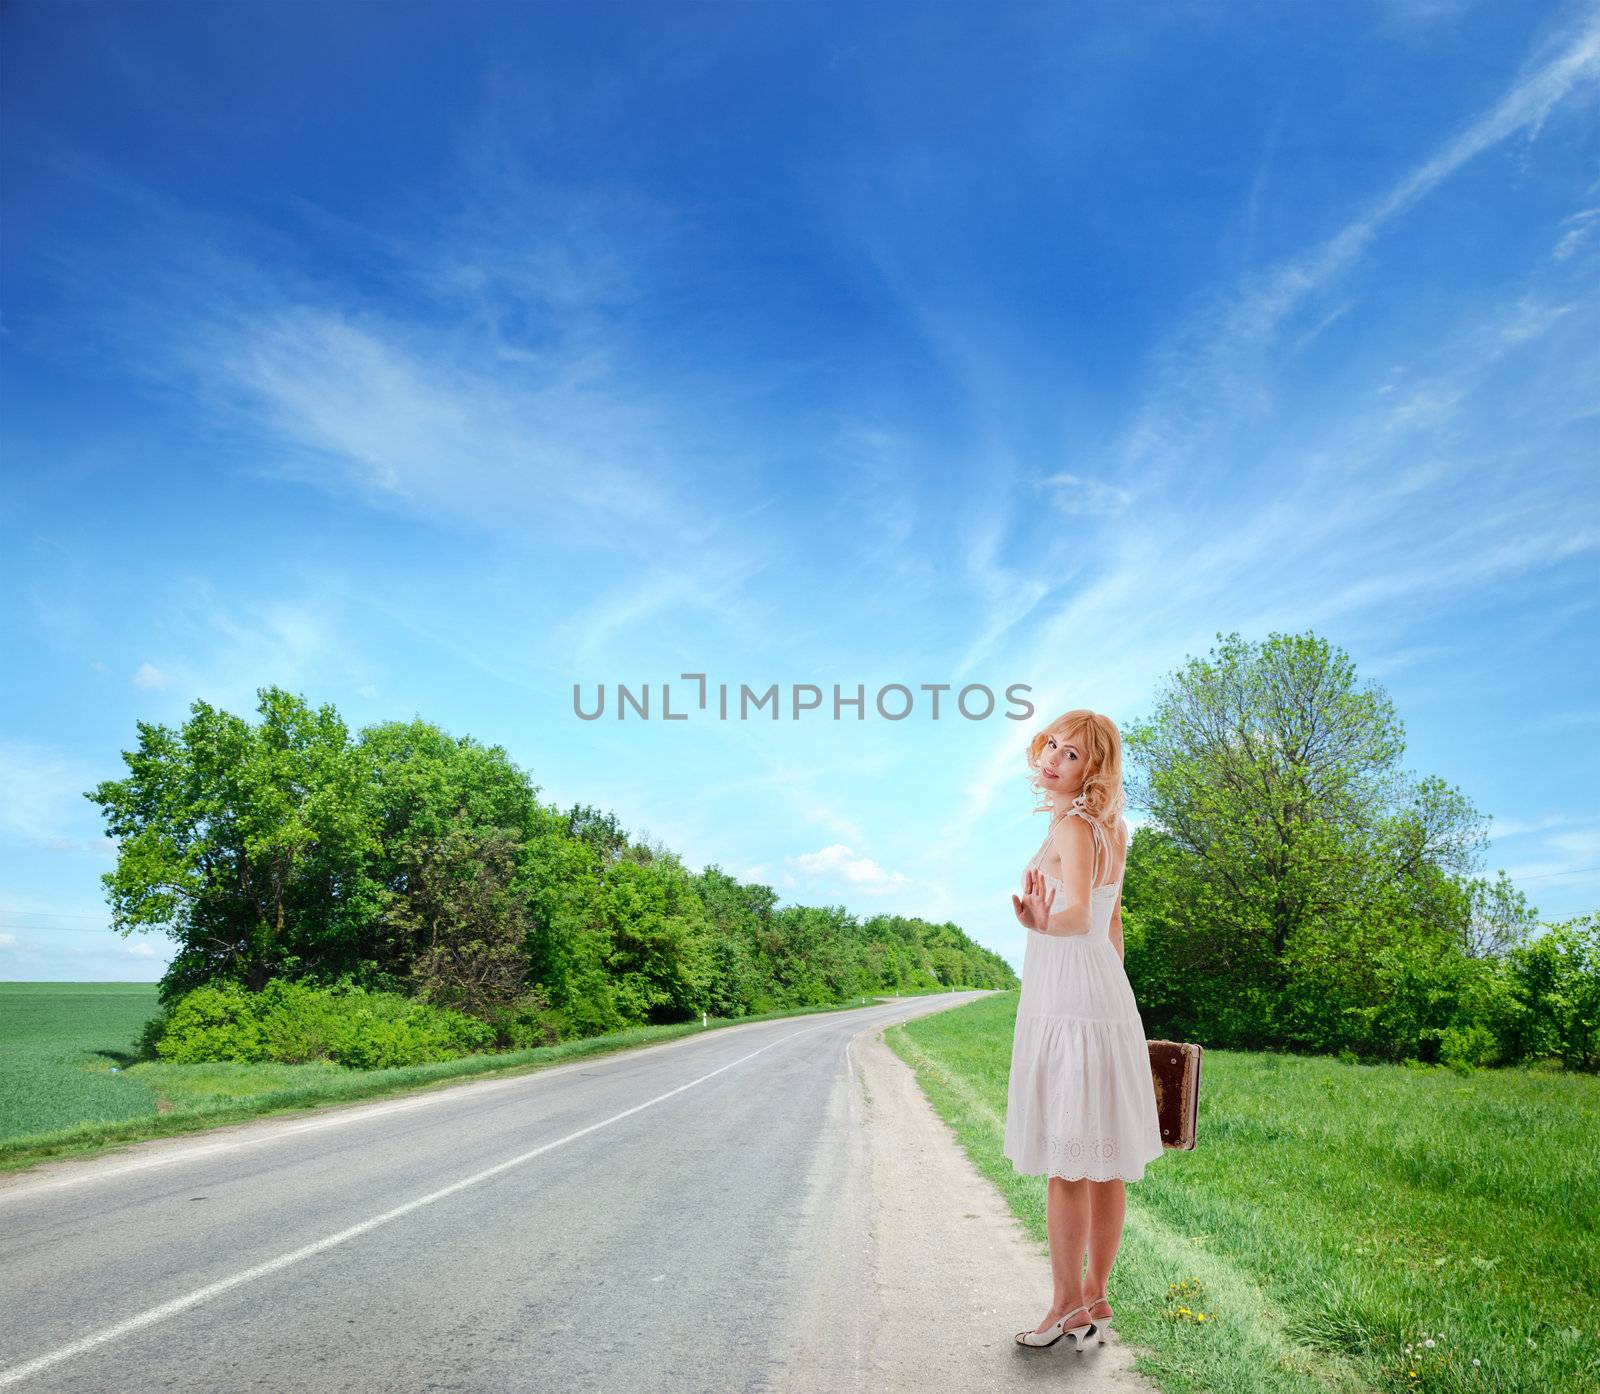 portrait of a girl in a rustic white dress . Isolated with clipping path